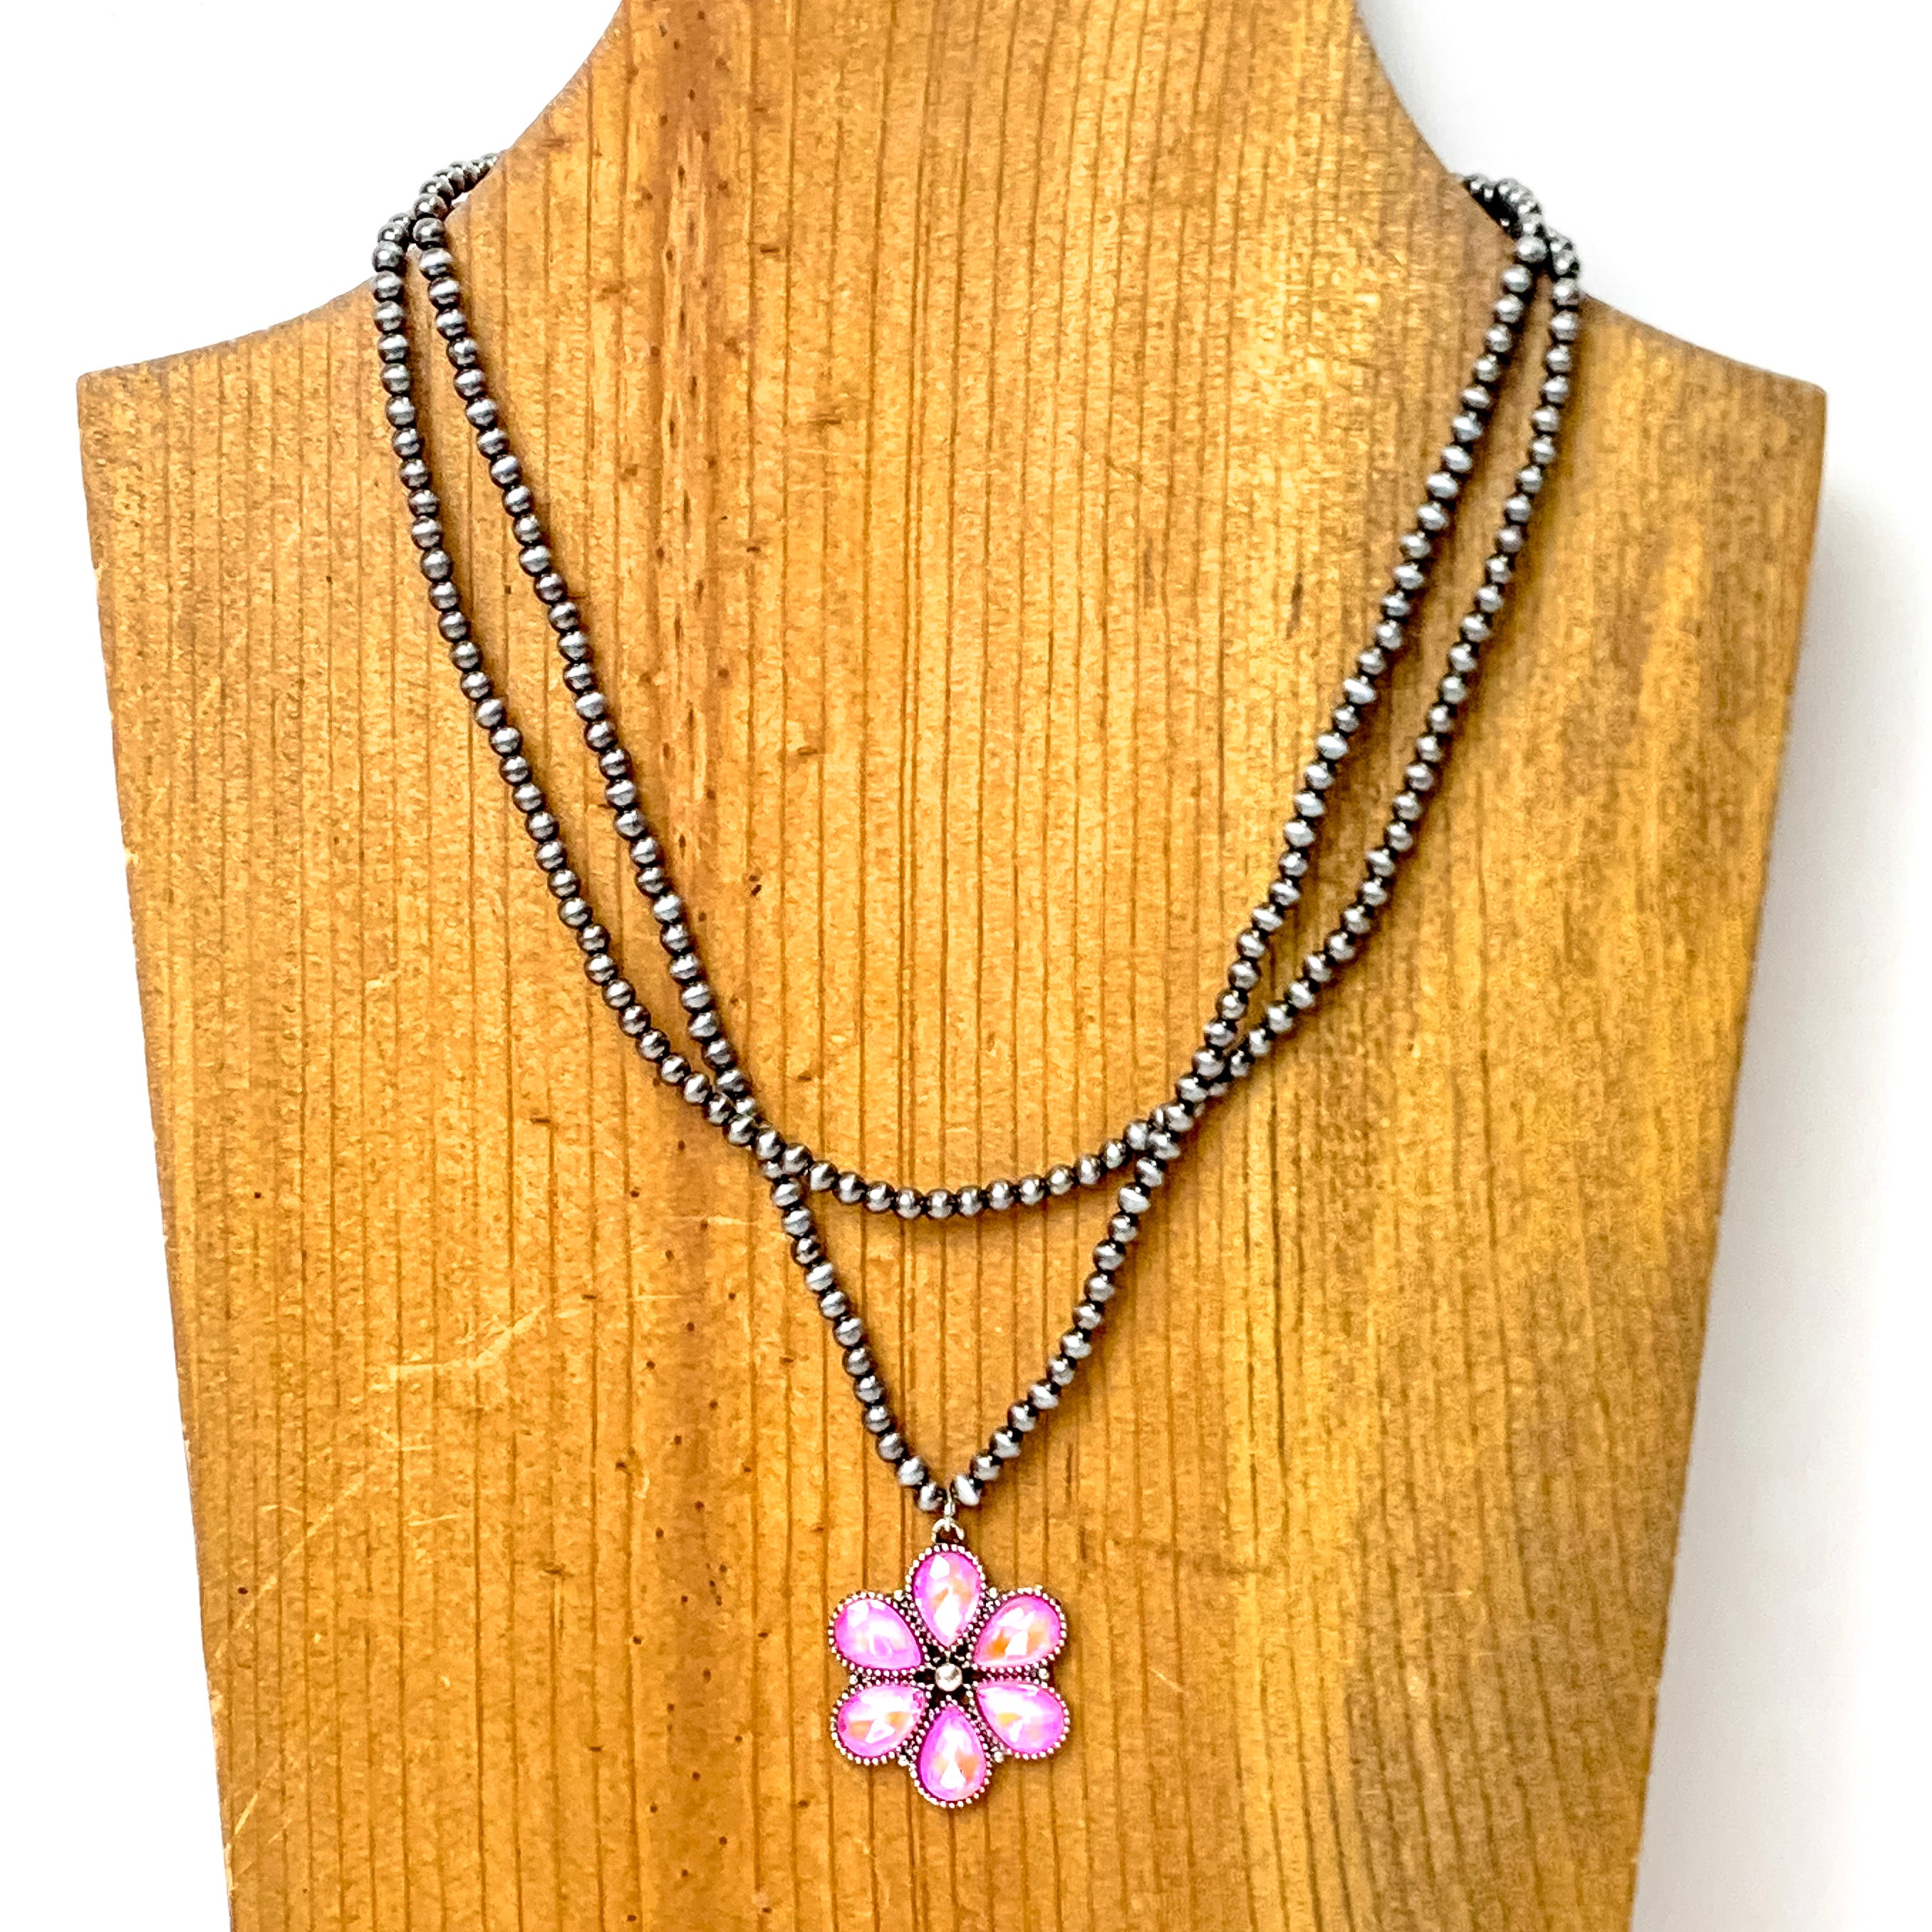 Bourbon Blooms Faux Navajo Pearl Necklace in Pink and Silver Tone - Giddy Up Glamour Boutique